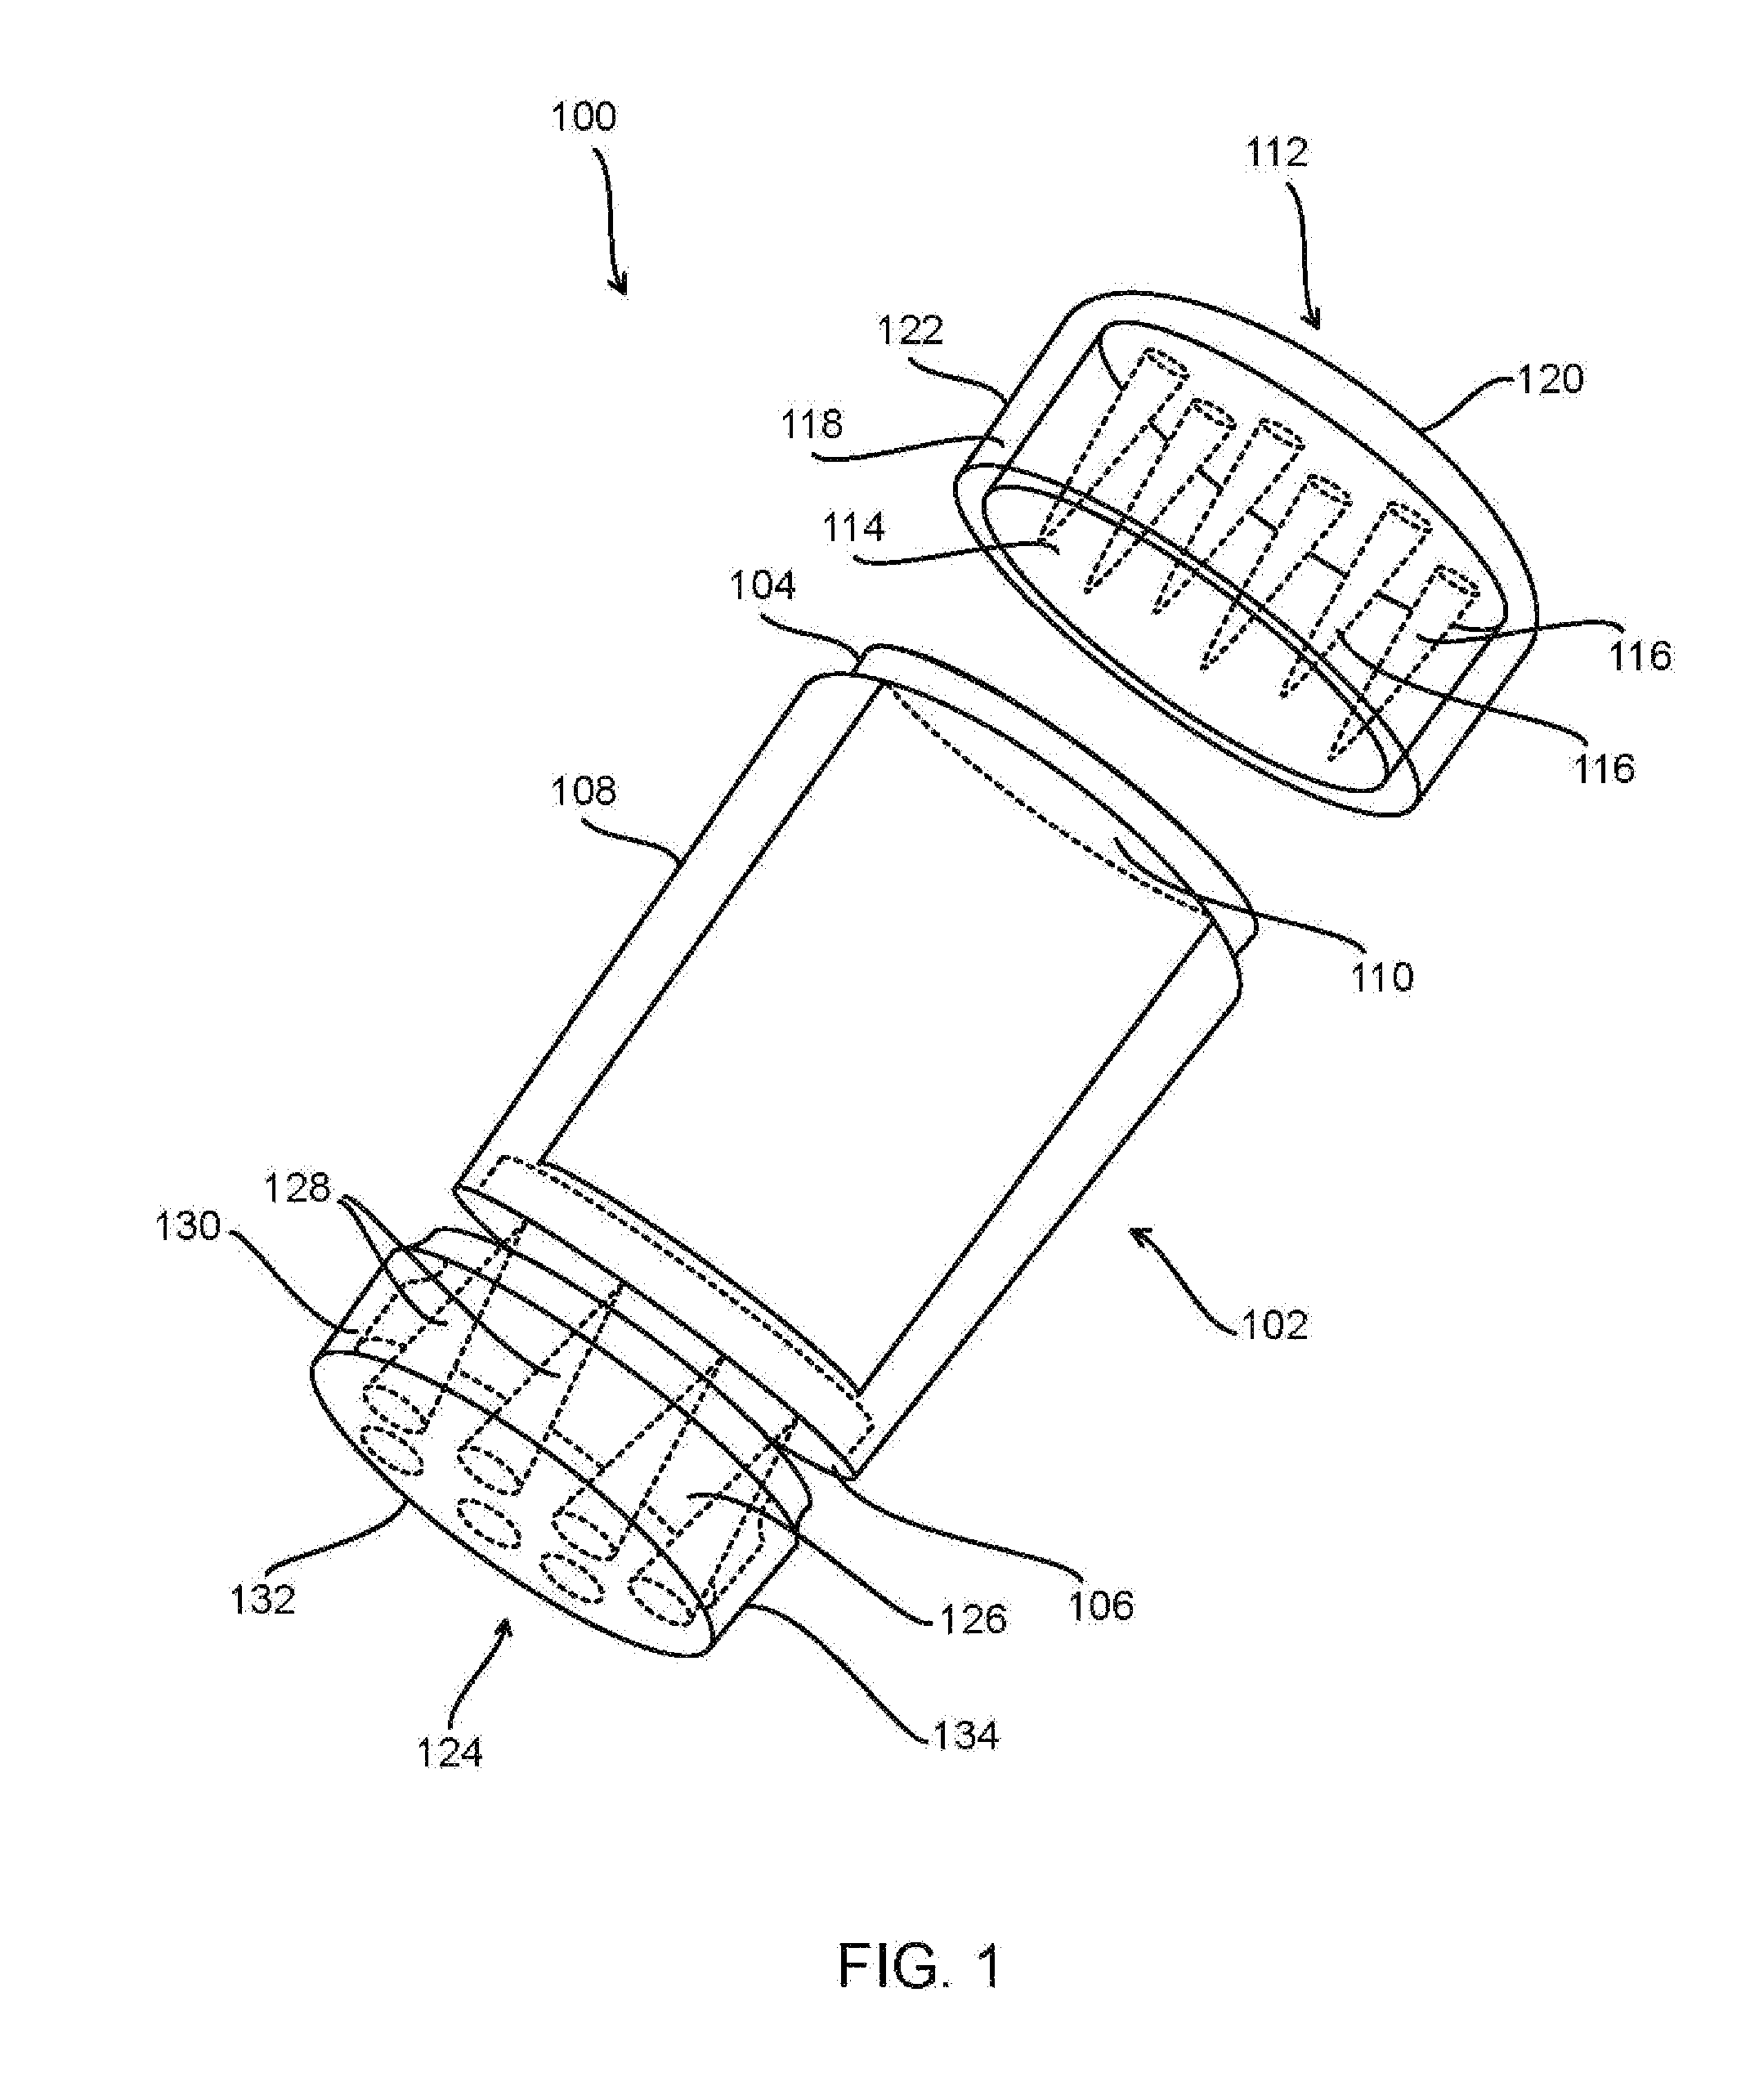 Device and Method for Airtight Storage and Grinding of Herbs